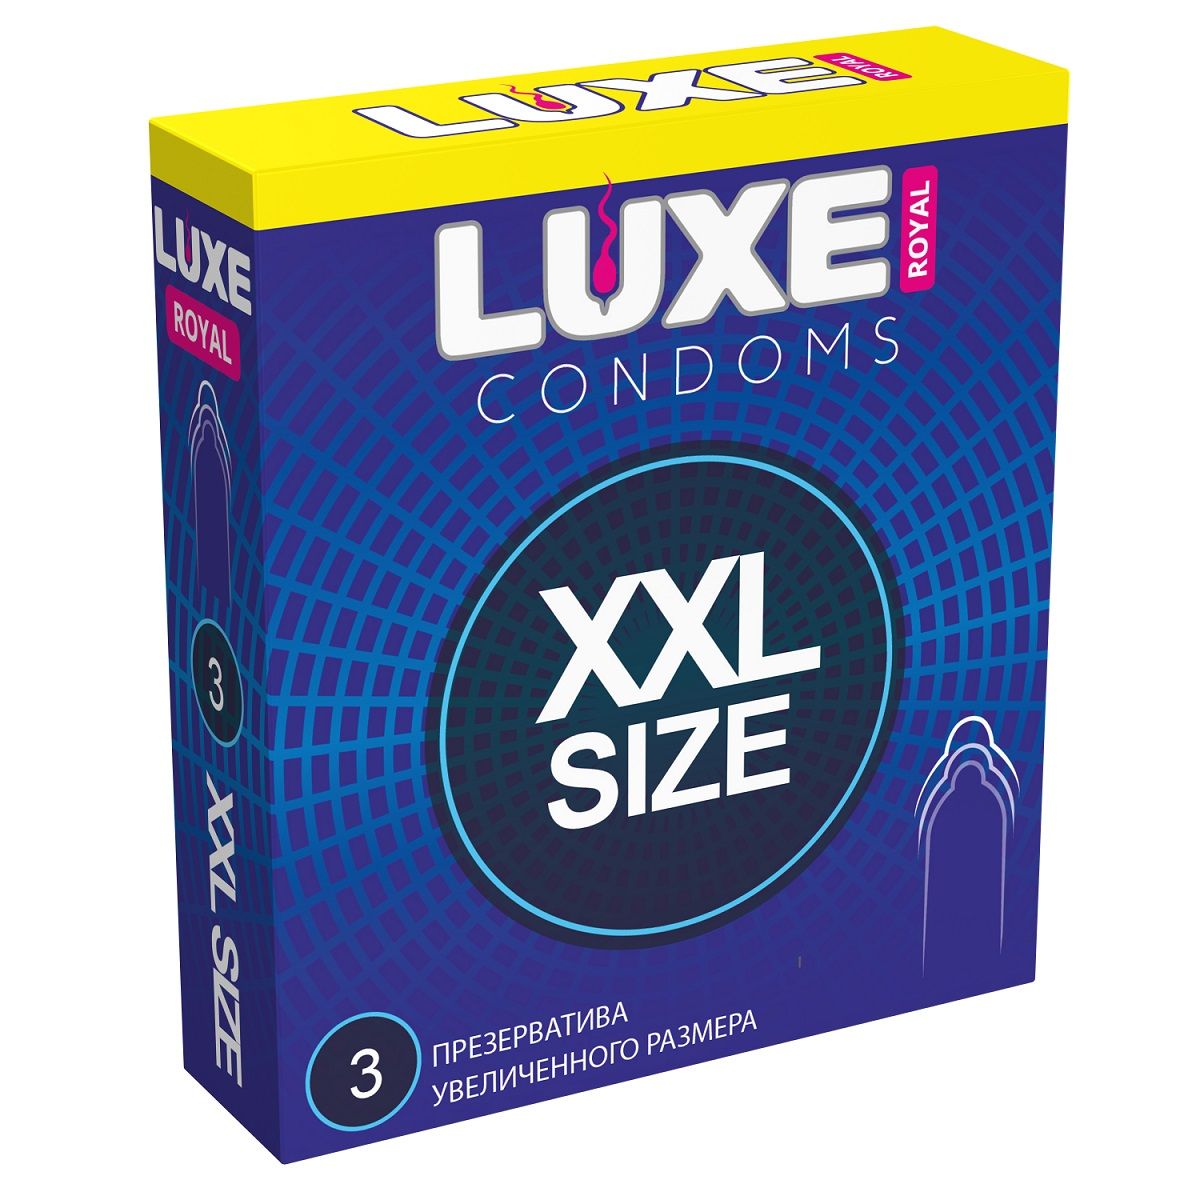    LUXE Royal XXL Size - 3 .